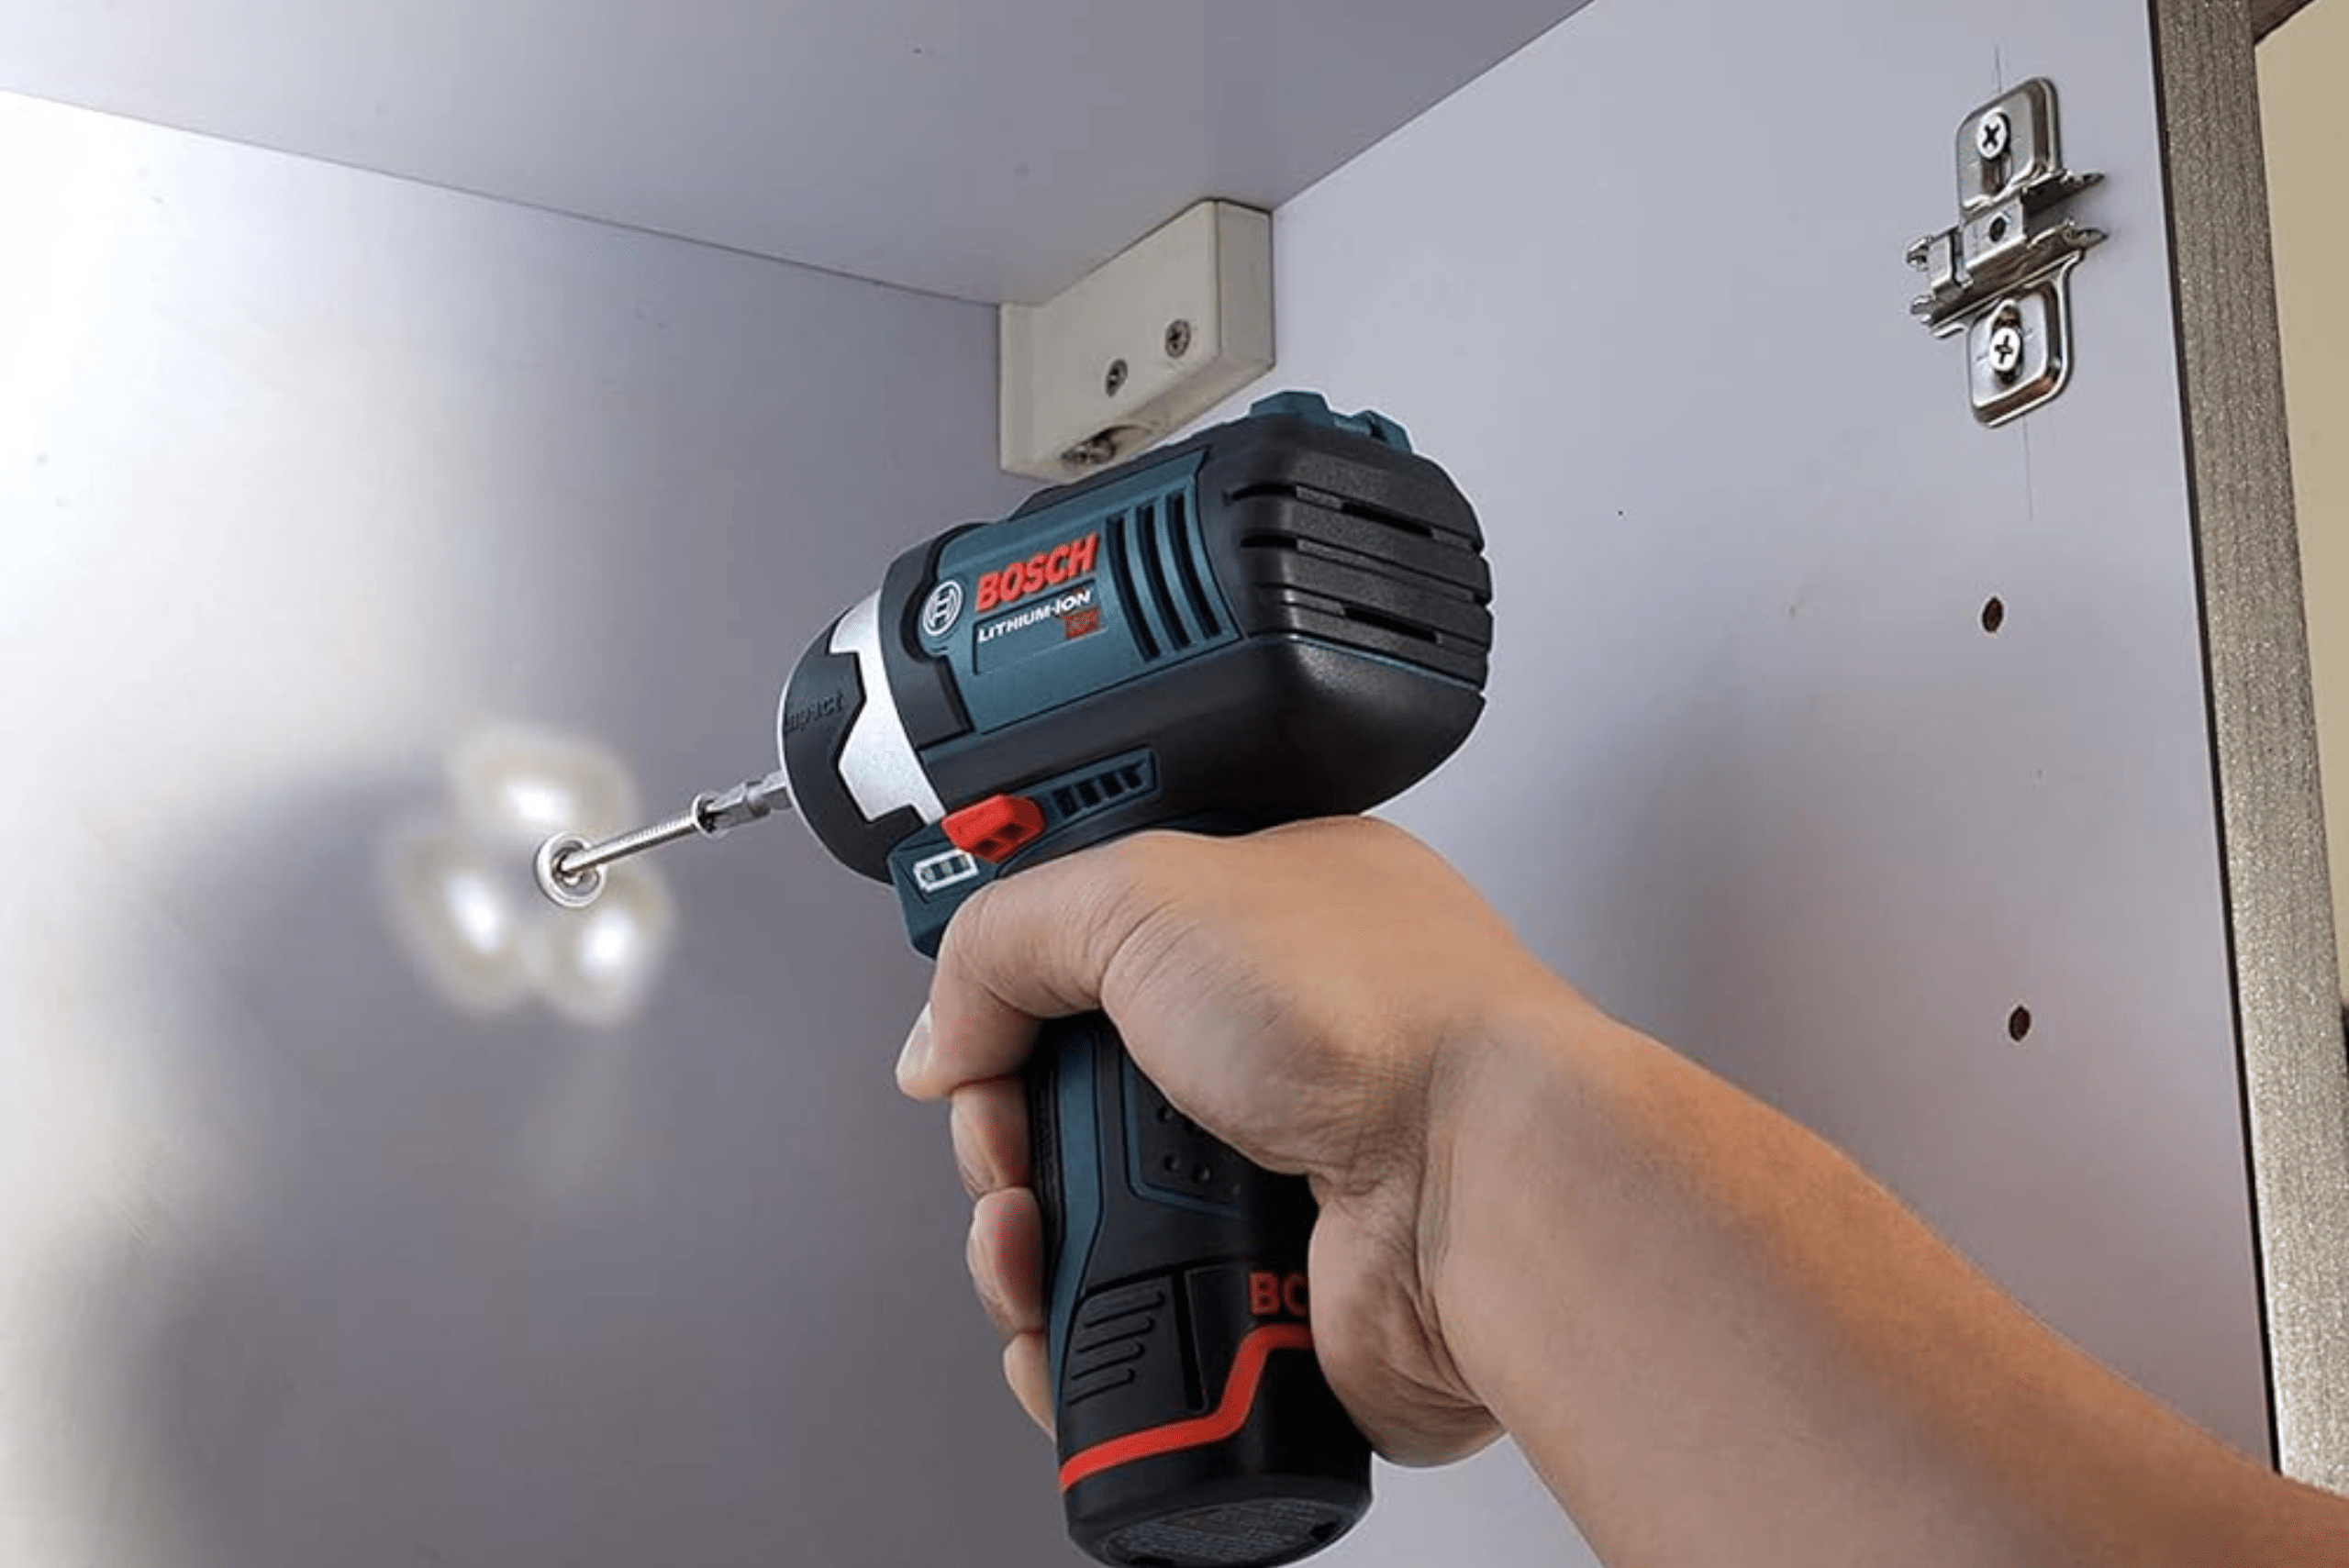 Person using an impact driver to install cabinets.